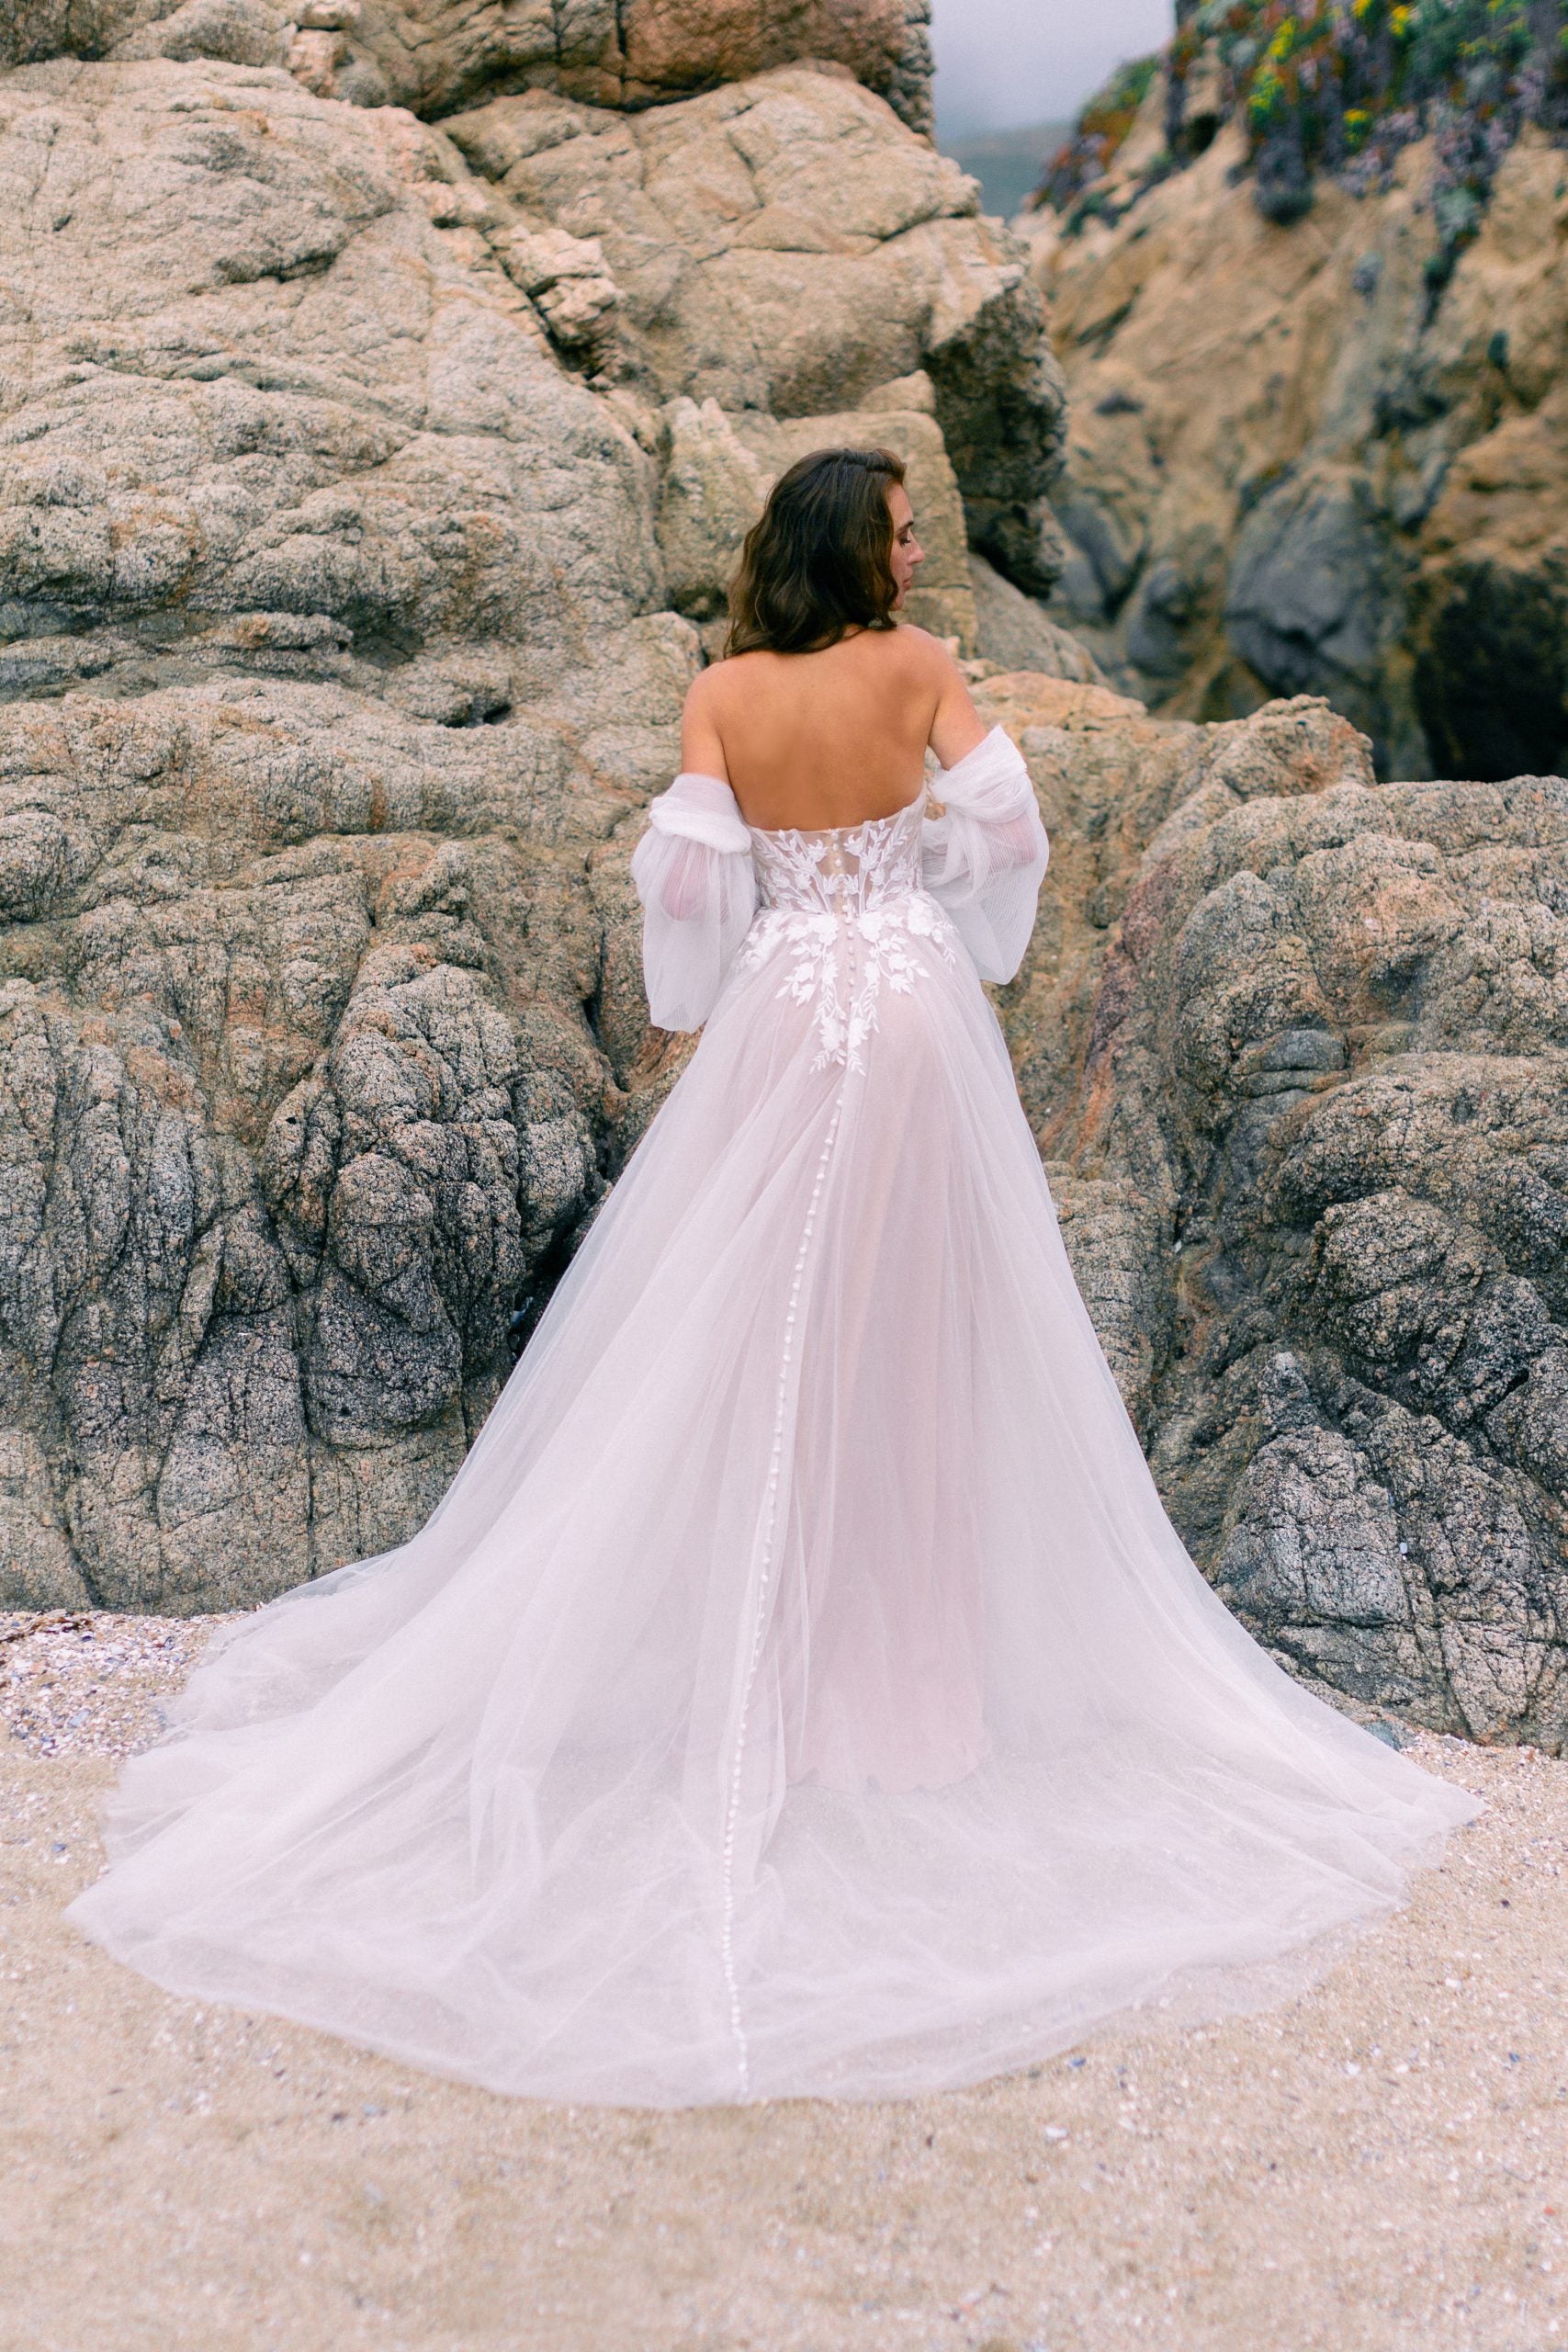 Detachable Tulle Puff Sleeves by Allure Bridals - Image 2